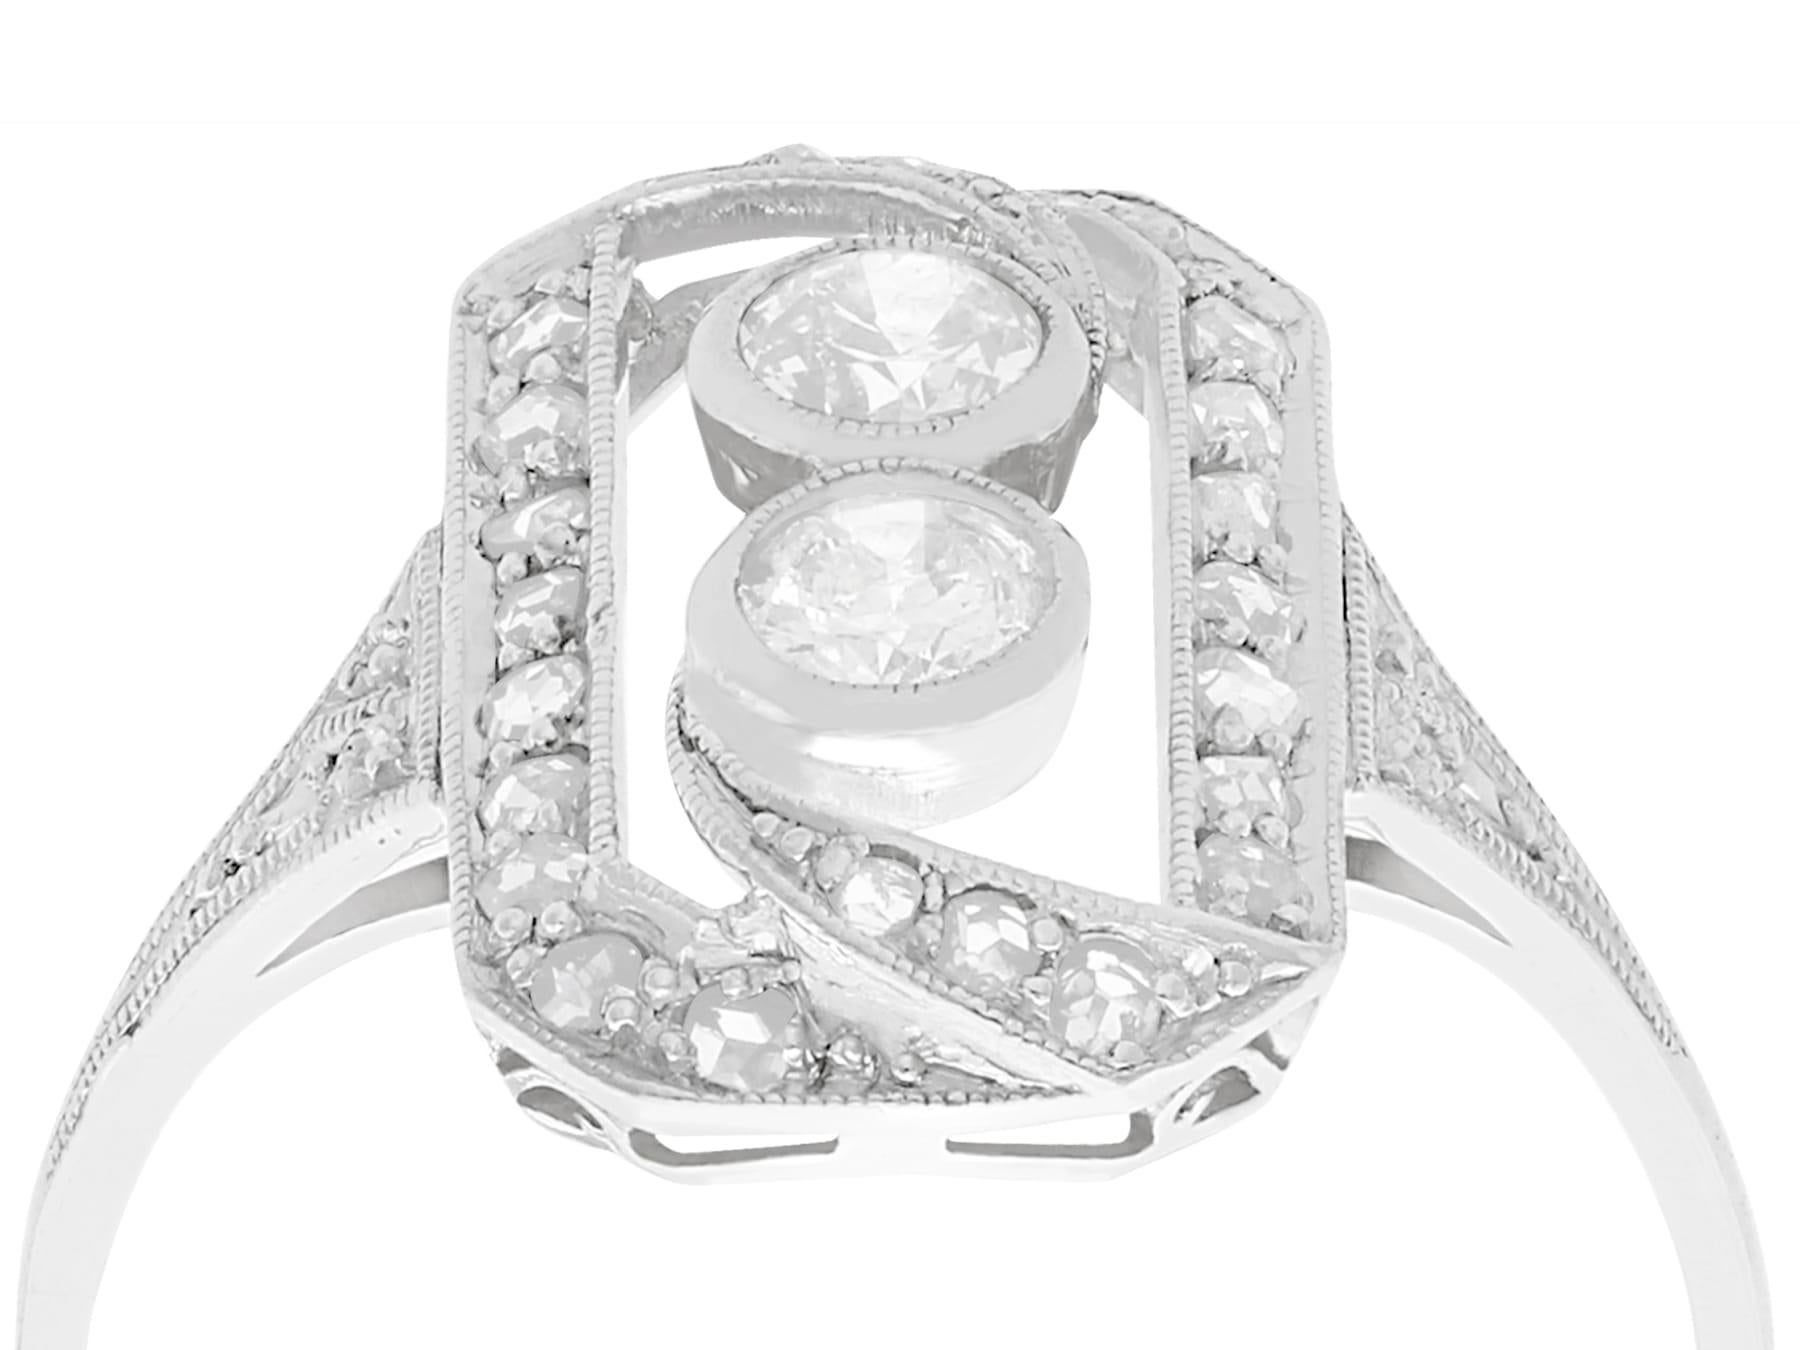 An impressive antique 0.63 carat diamond and 18 carat white gold dress ring; part of our diverse antique jewellery and estate jewelry collections.

This fine and impressive diamond cocktail ring has been crafted in 18 ct white gold.

The pierced